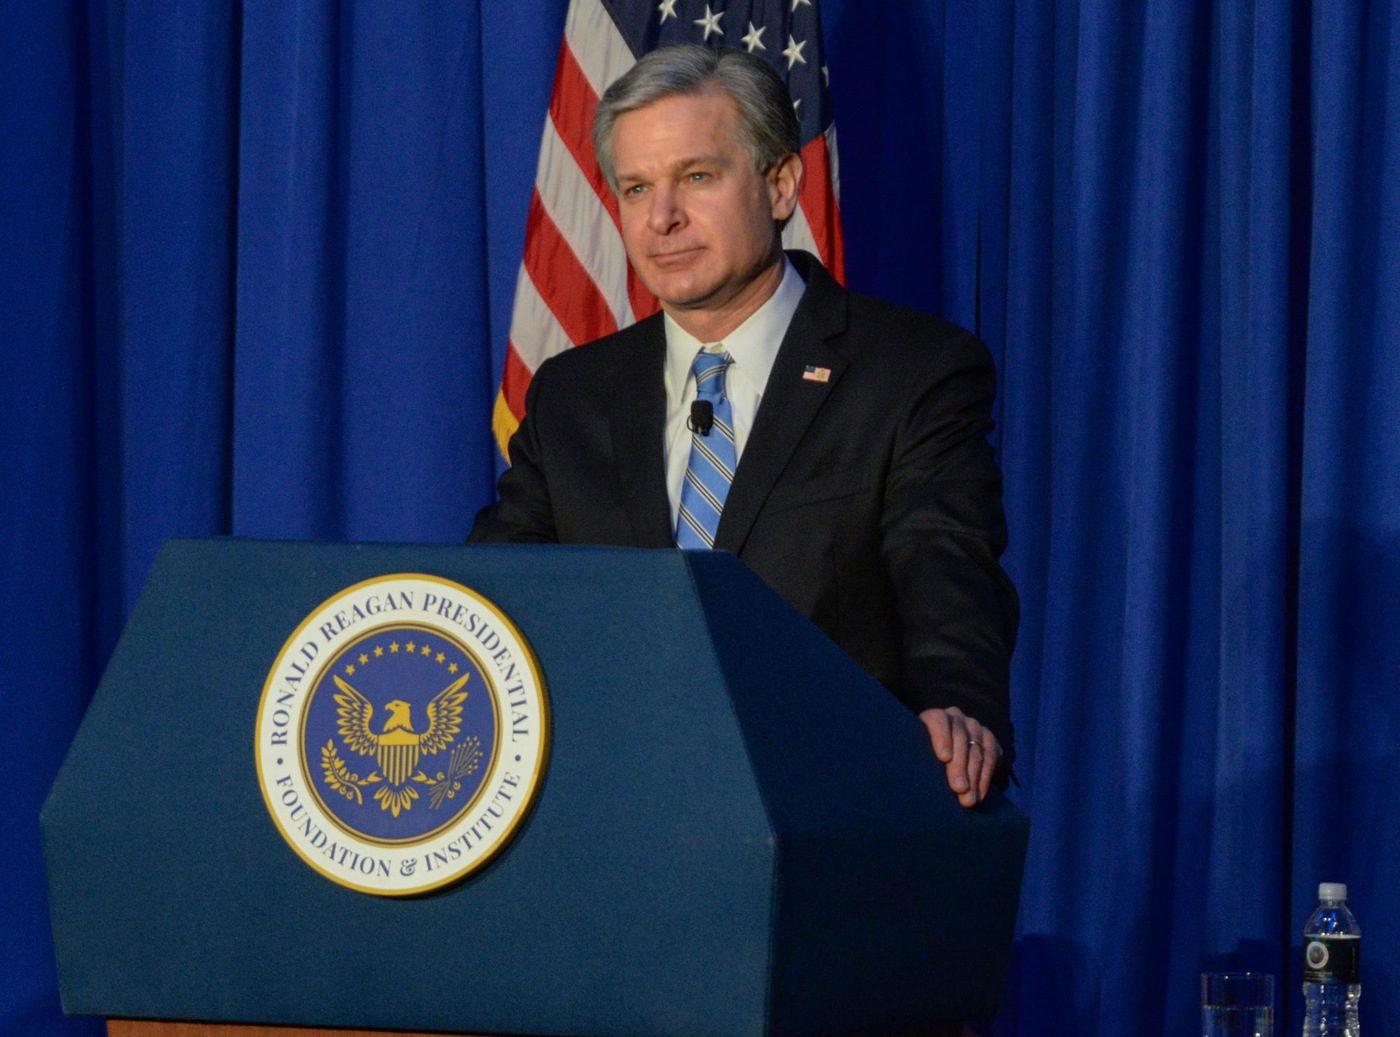 Director Wray speaks about the threat posed by China to the United States at the Ronald Reagan Presidential Library and Museum in Simi Valley, California, on January 31, 2022. (Photo courtesy of the Ronald Reagan Presidential Library and Museum)